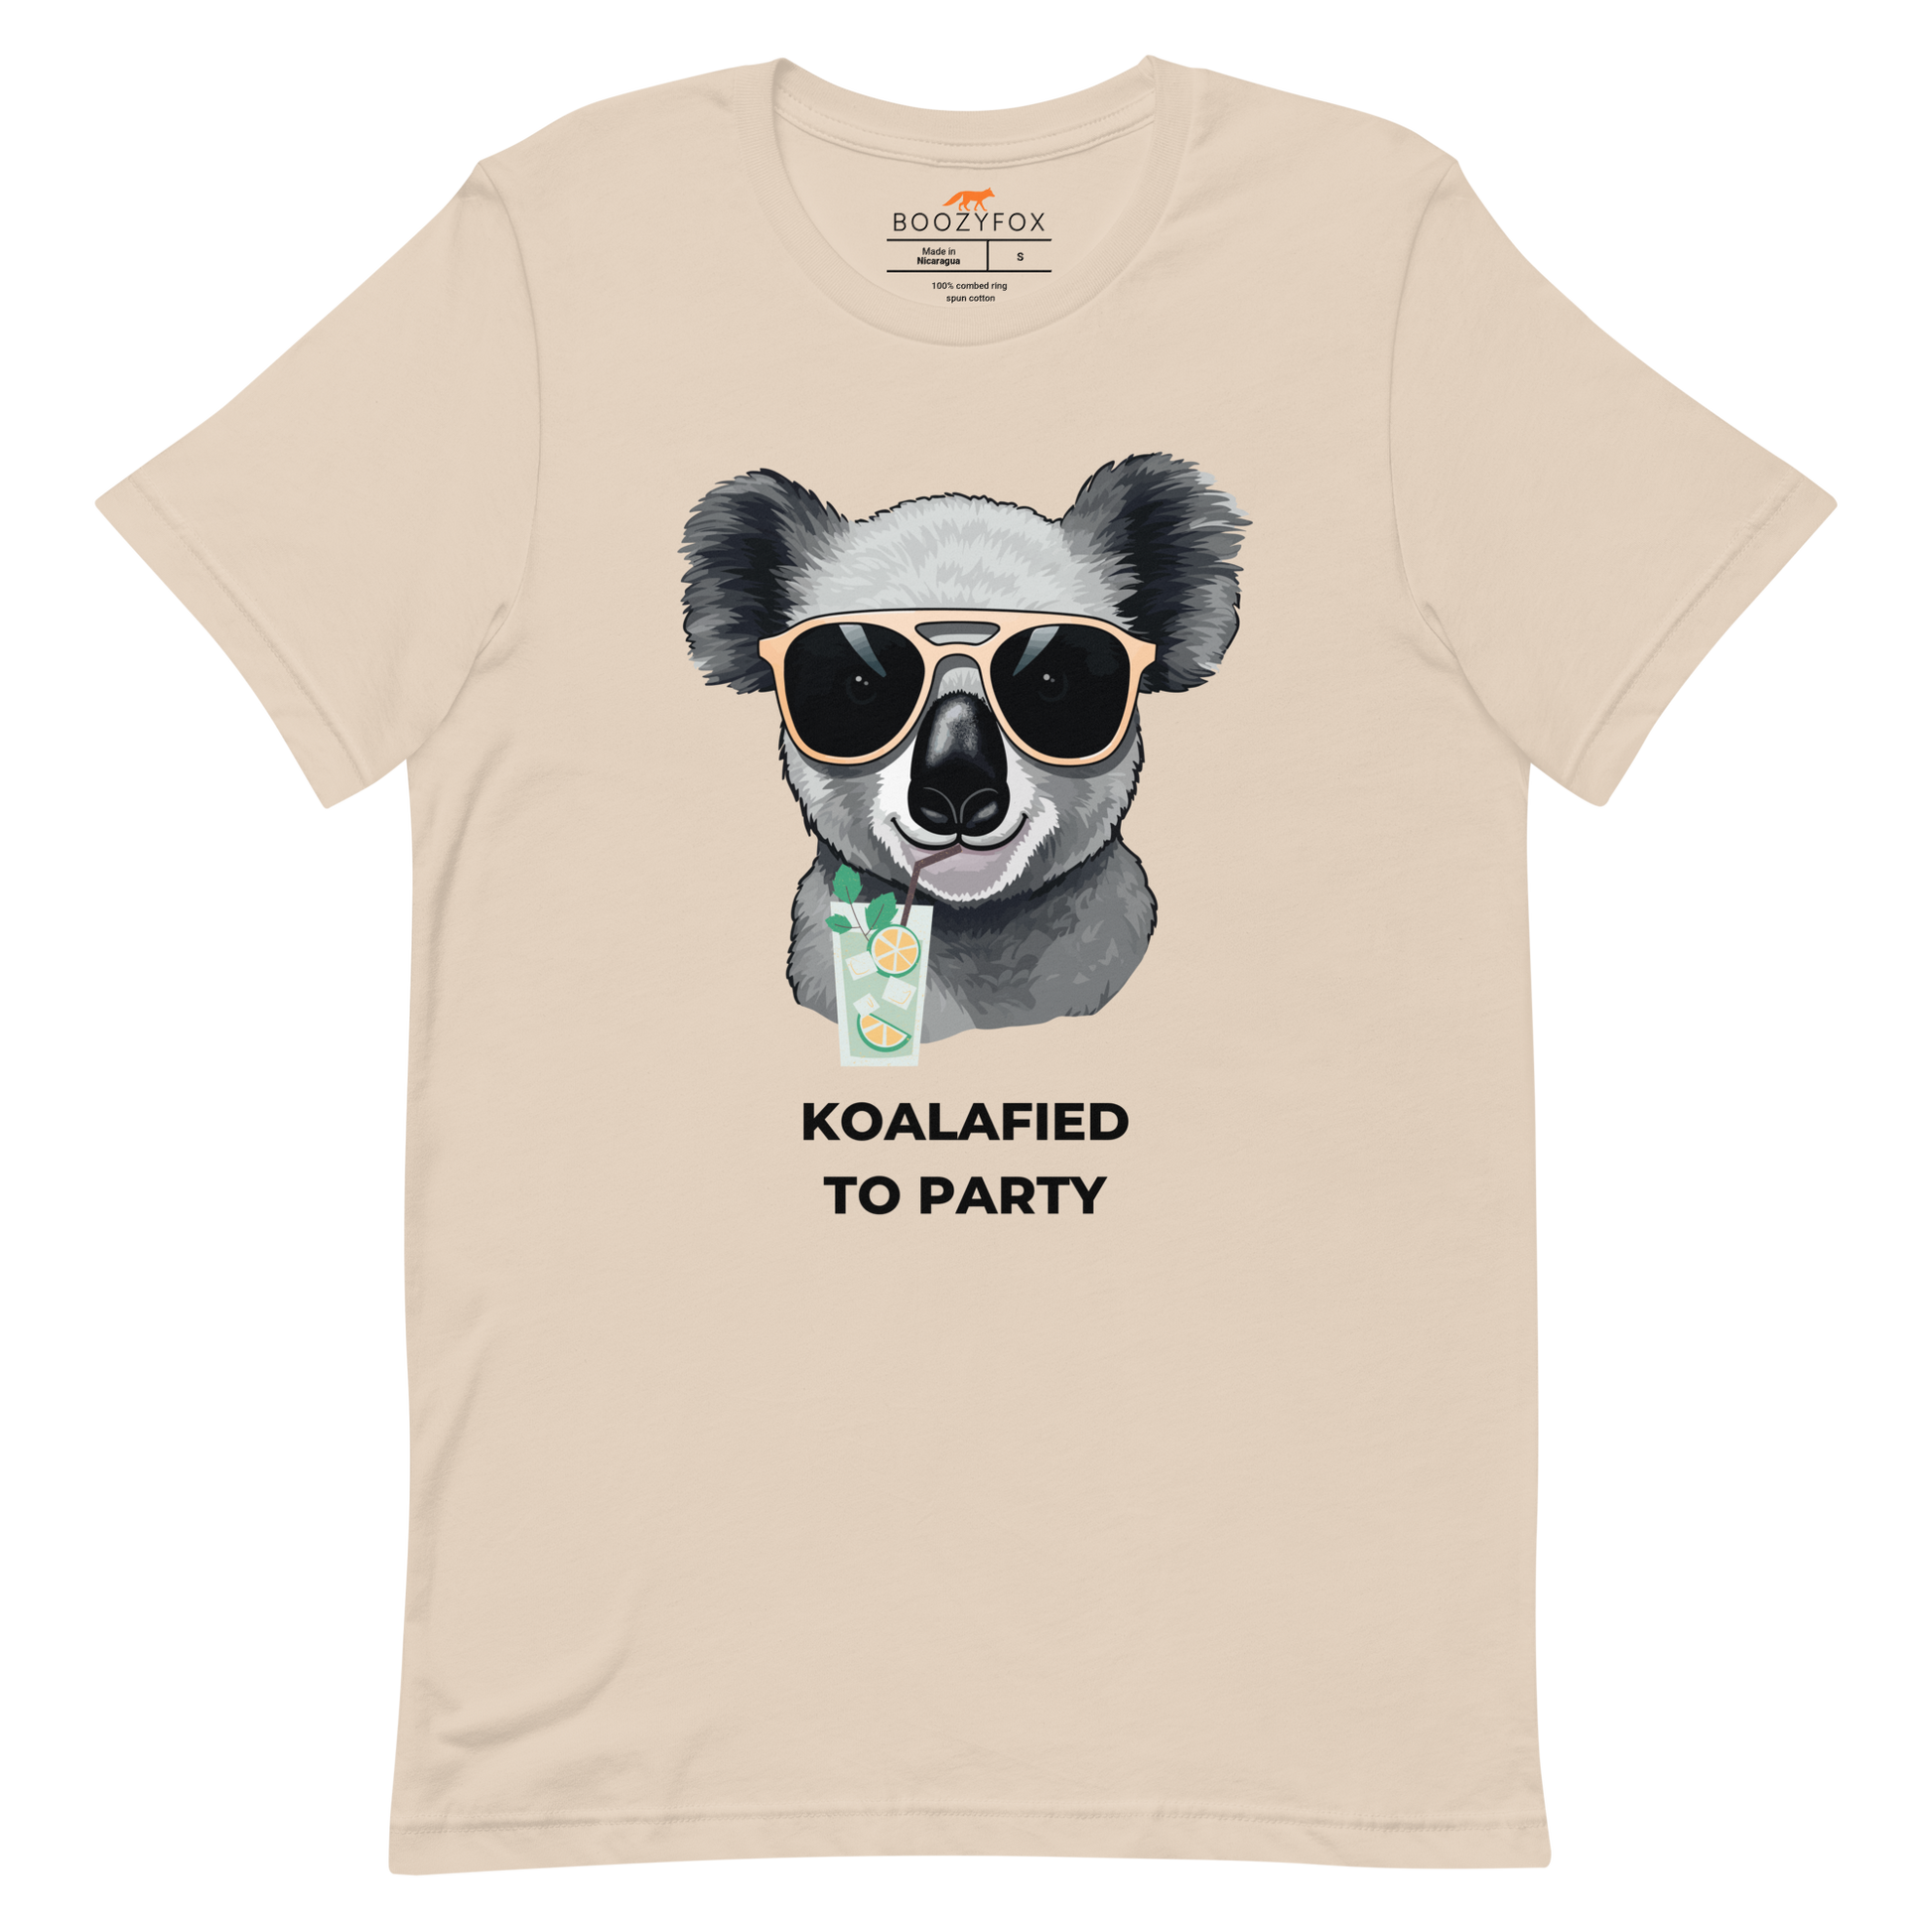 Soft Cream Premium Koala Tee featuring an adorable Koalafied To Party graphic on the chest - Funny Graphic Koala Tees - Boozy Fox